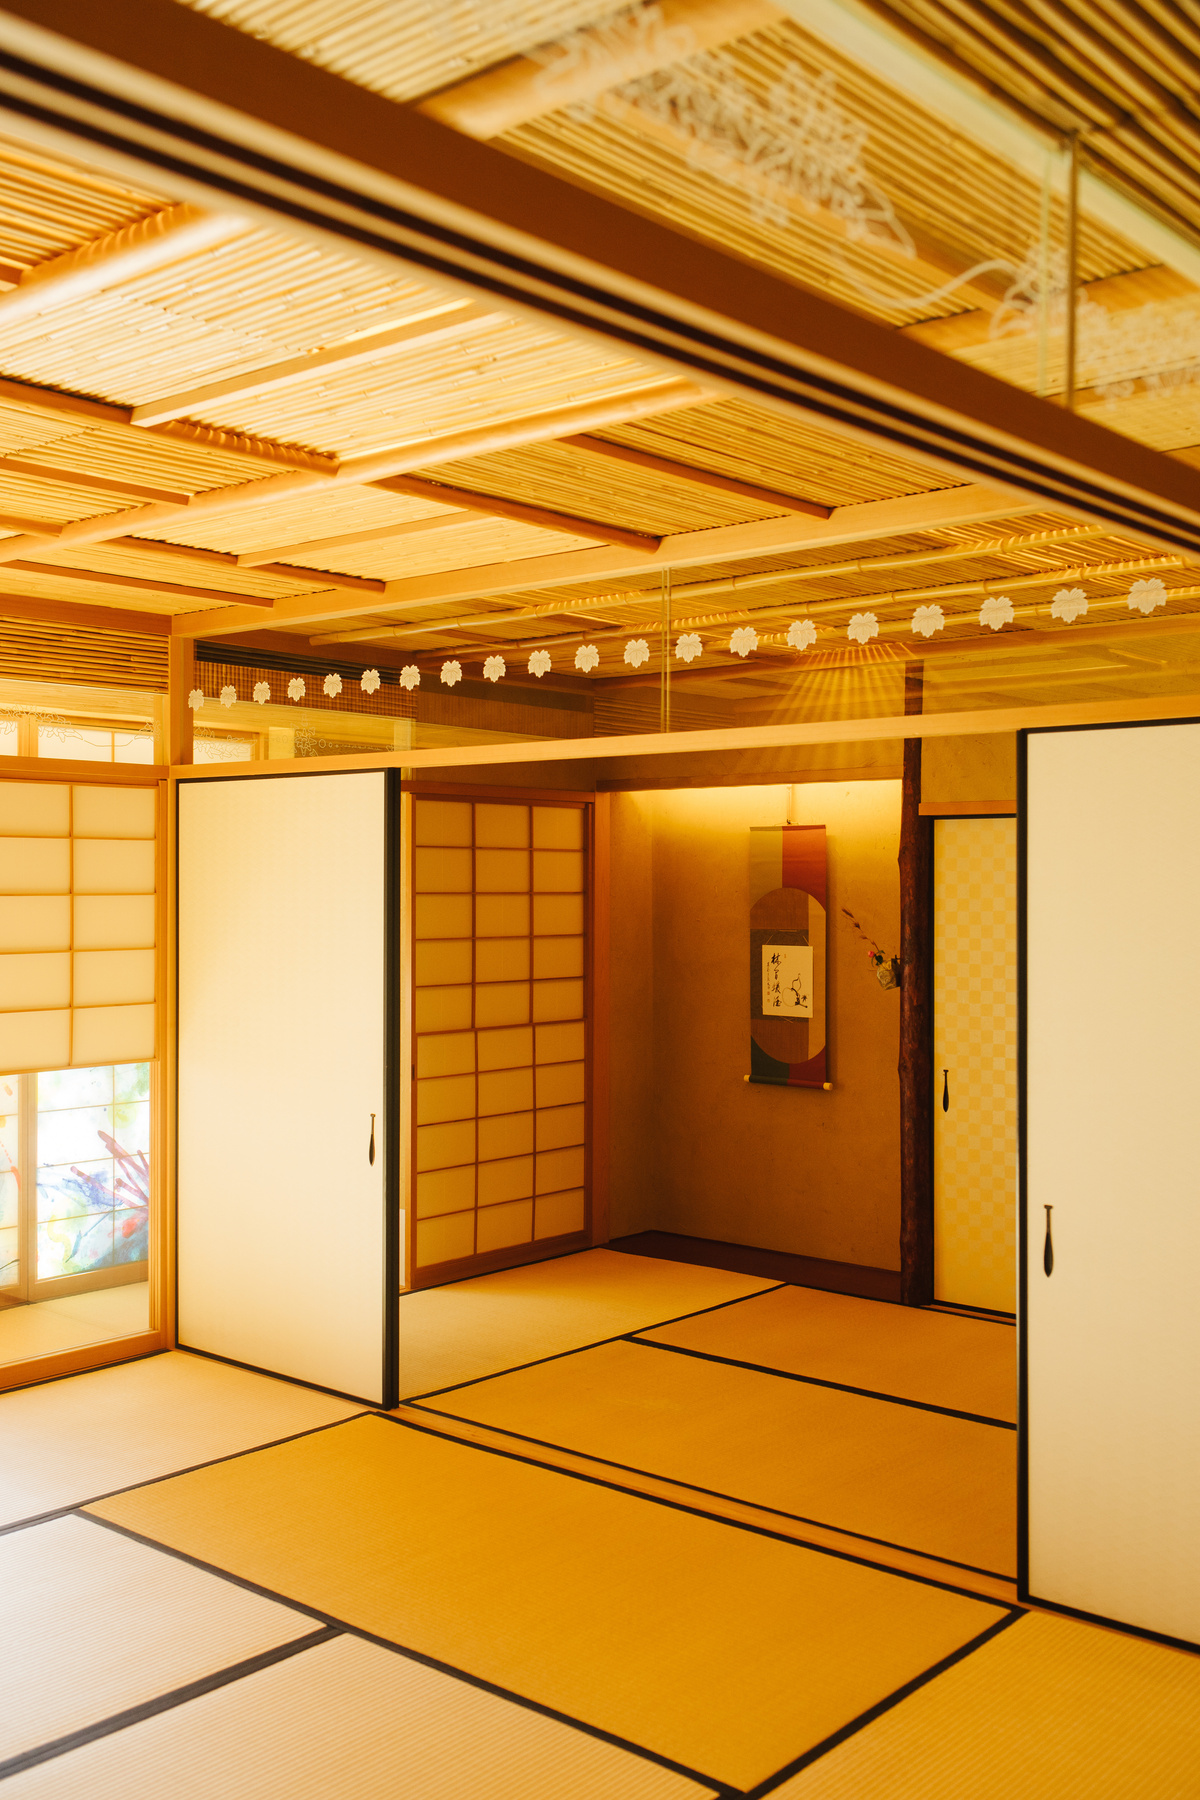 Interior of a Traditional Japanese Tea House